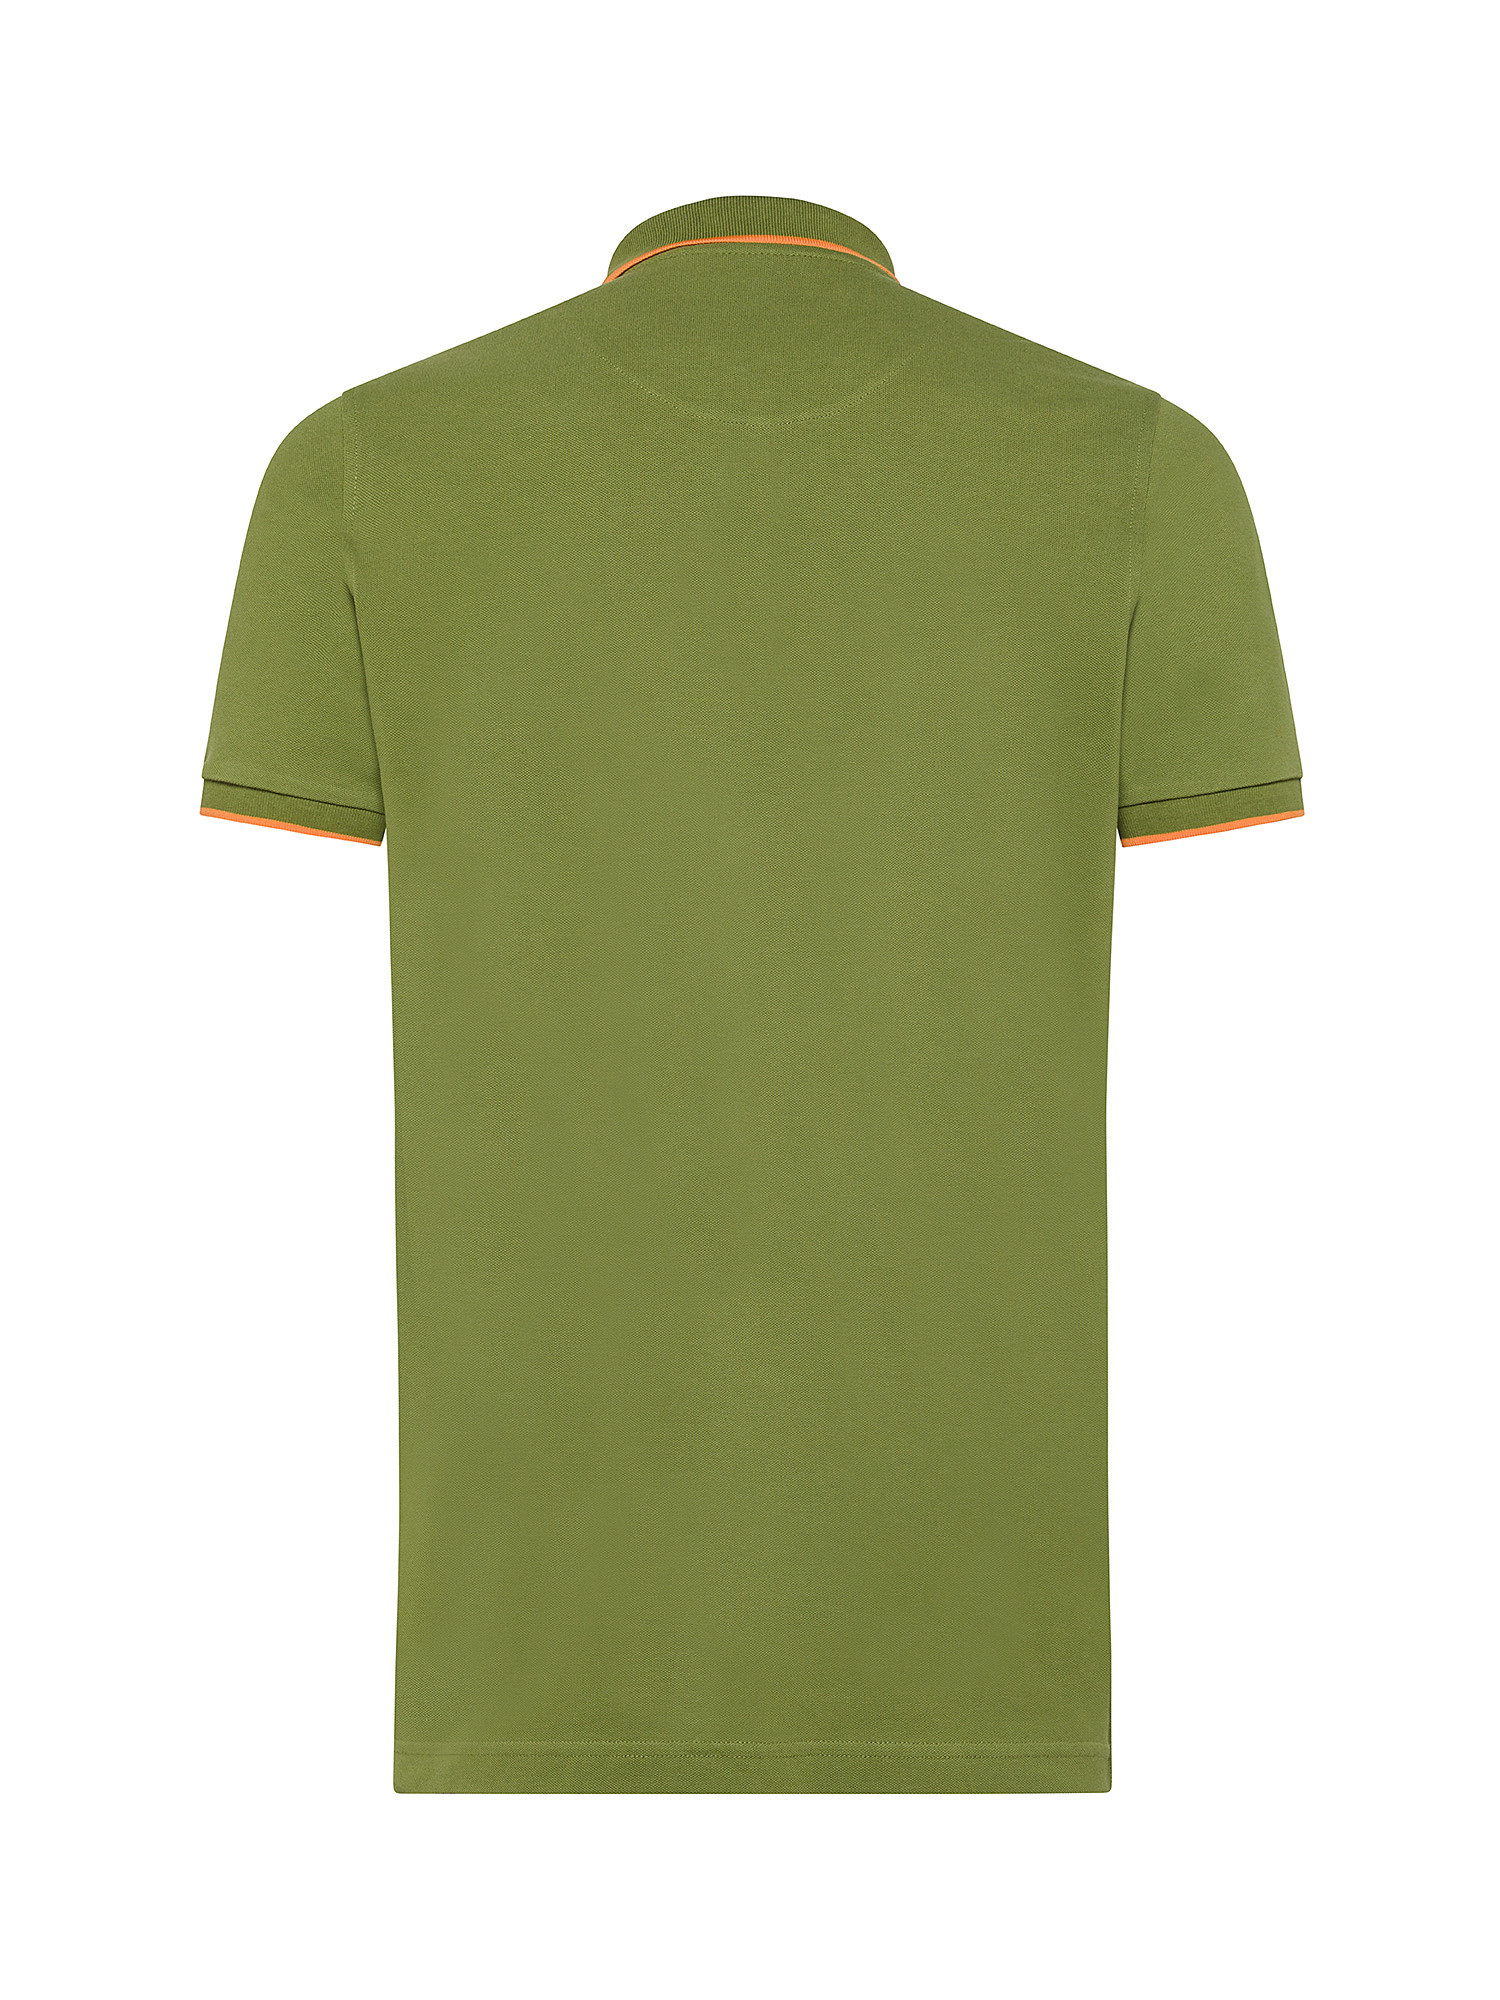 Manuel Ritz - Polo with contrasting edges and logo, Green, large image number 1